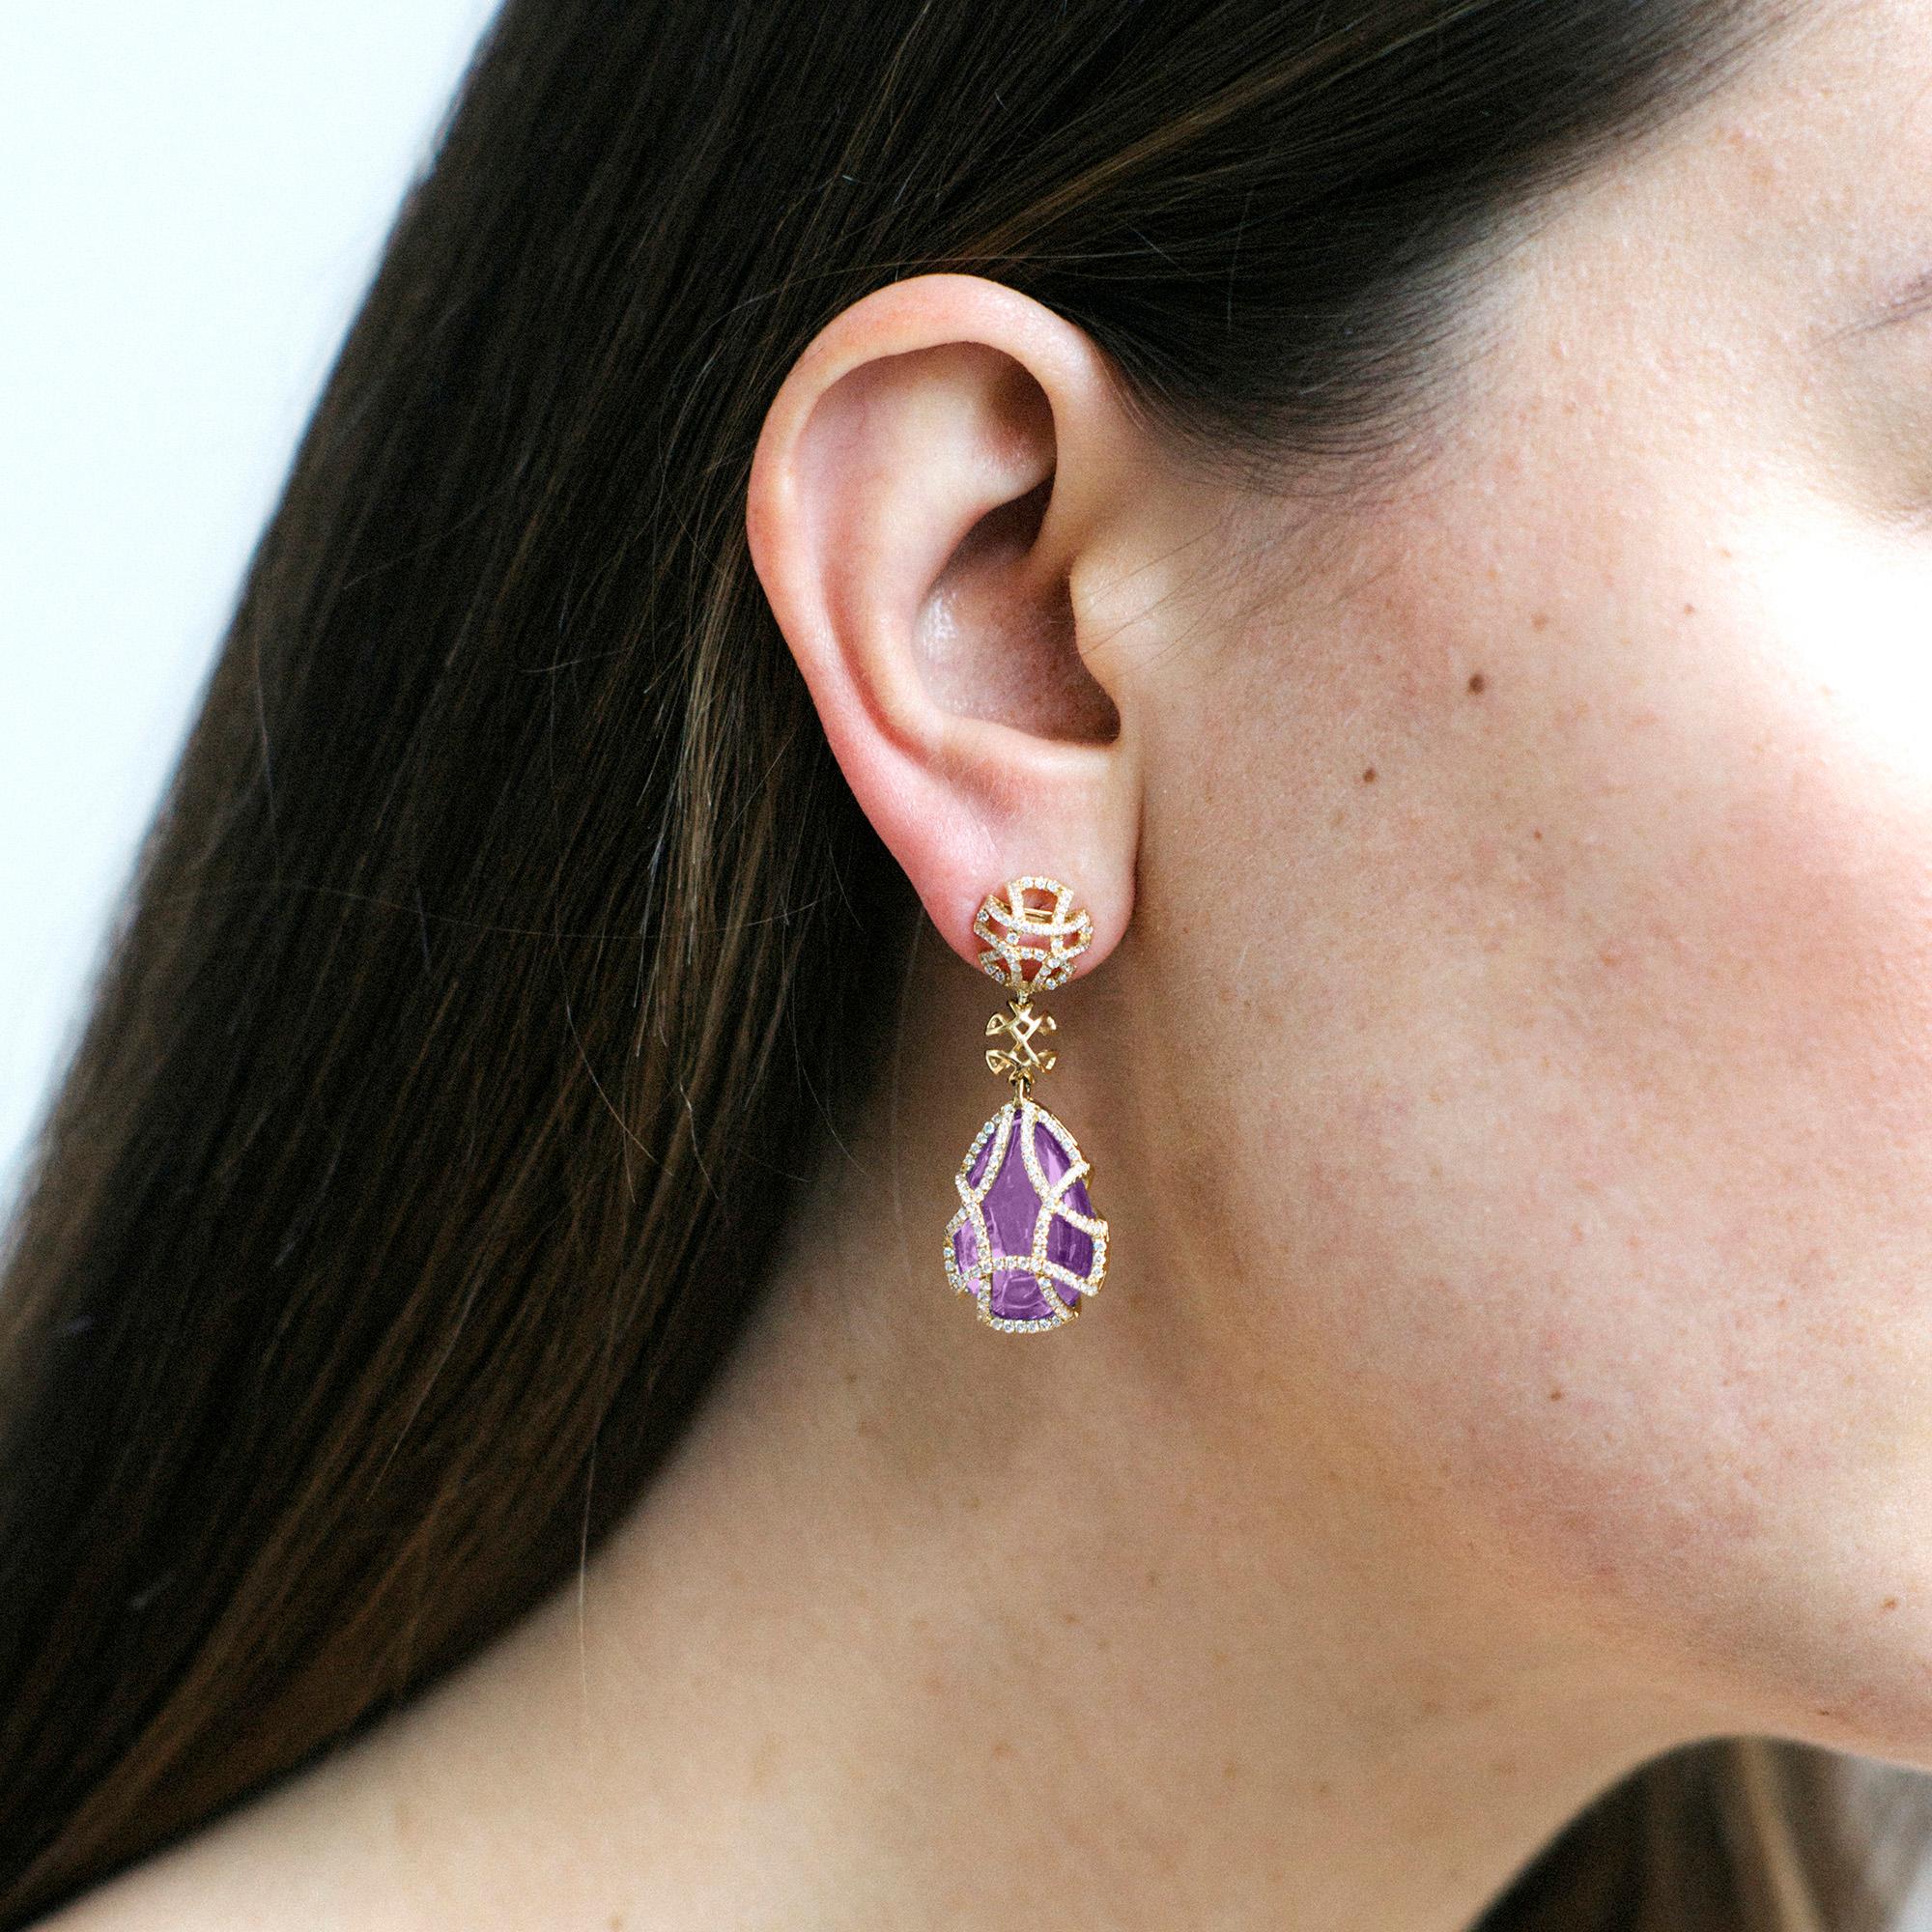 Amethyst Teardrop Cage Earrings with Diamonds in 18K Rose Gold, from 'Freedom' Collection

Stone Size: 19 x 12.7 mm

Diamonds: G-H / VS, Approx. Wt.: 1.40 Carats